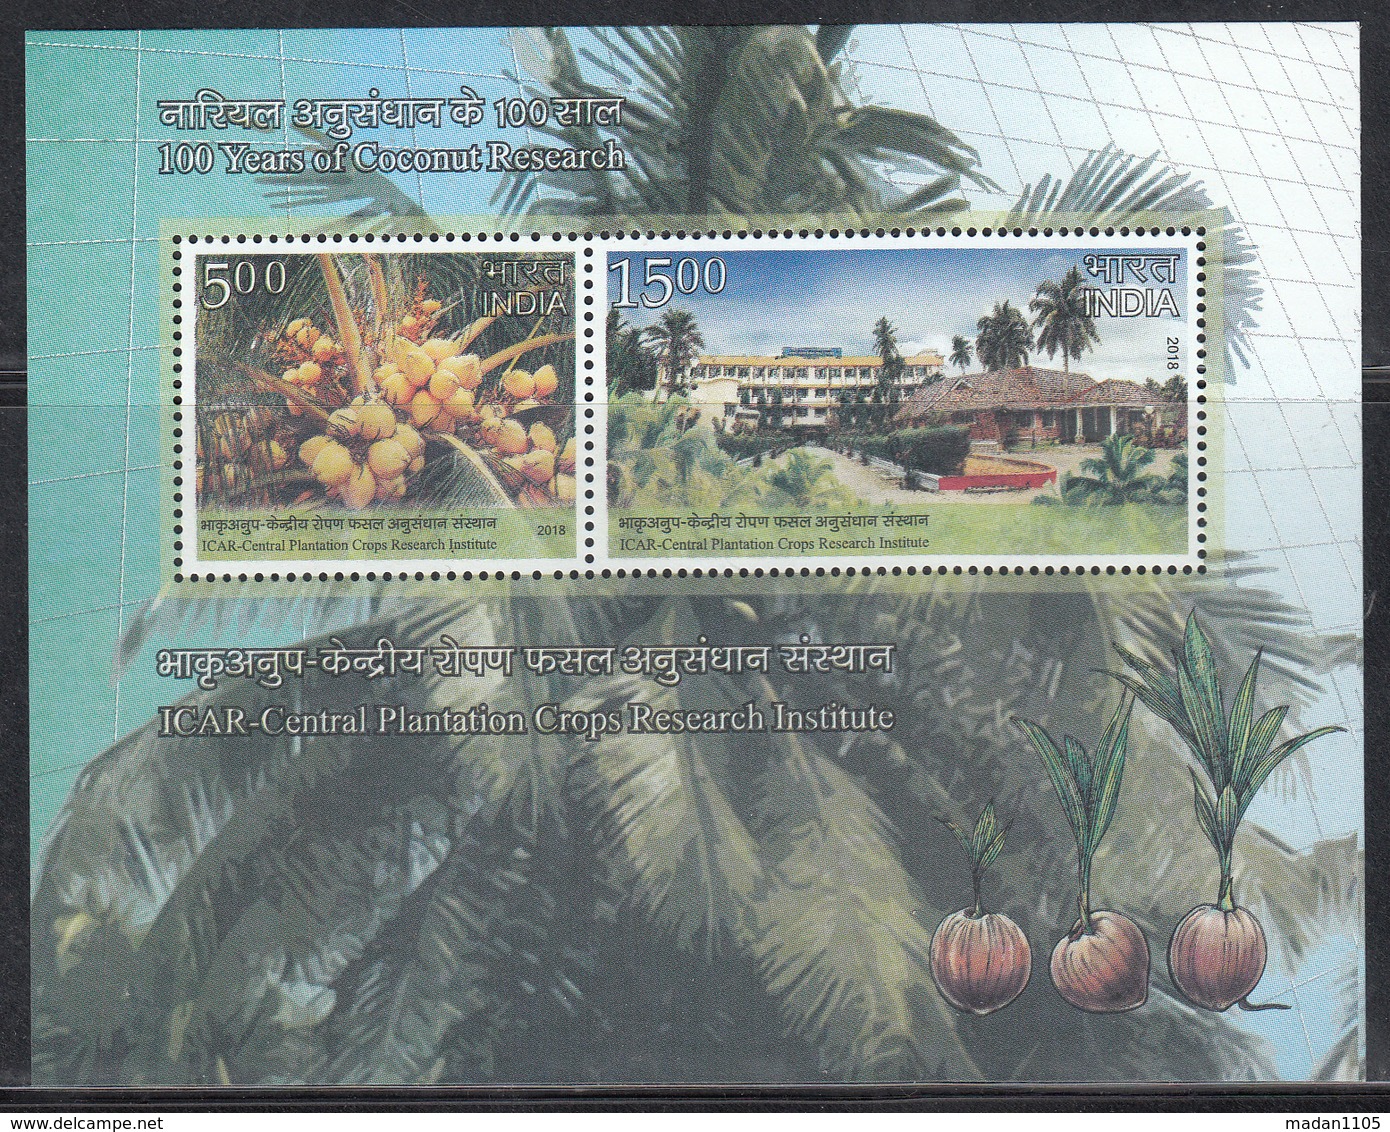 INDIA 2018 MS COCONUT Research 100 Years, ICAR, Miniature Sheet, MNH(**) - Nuovi